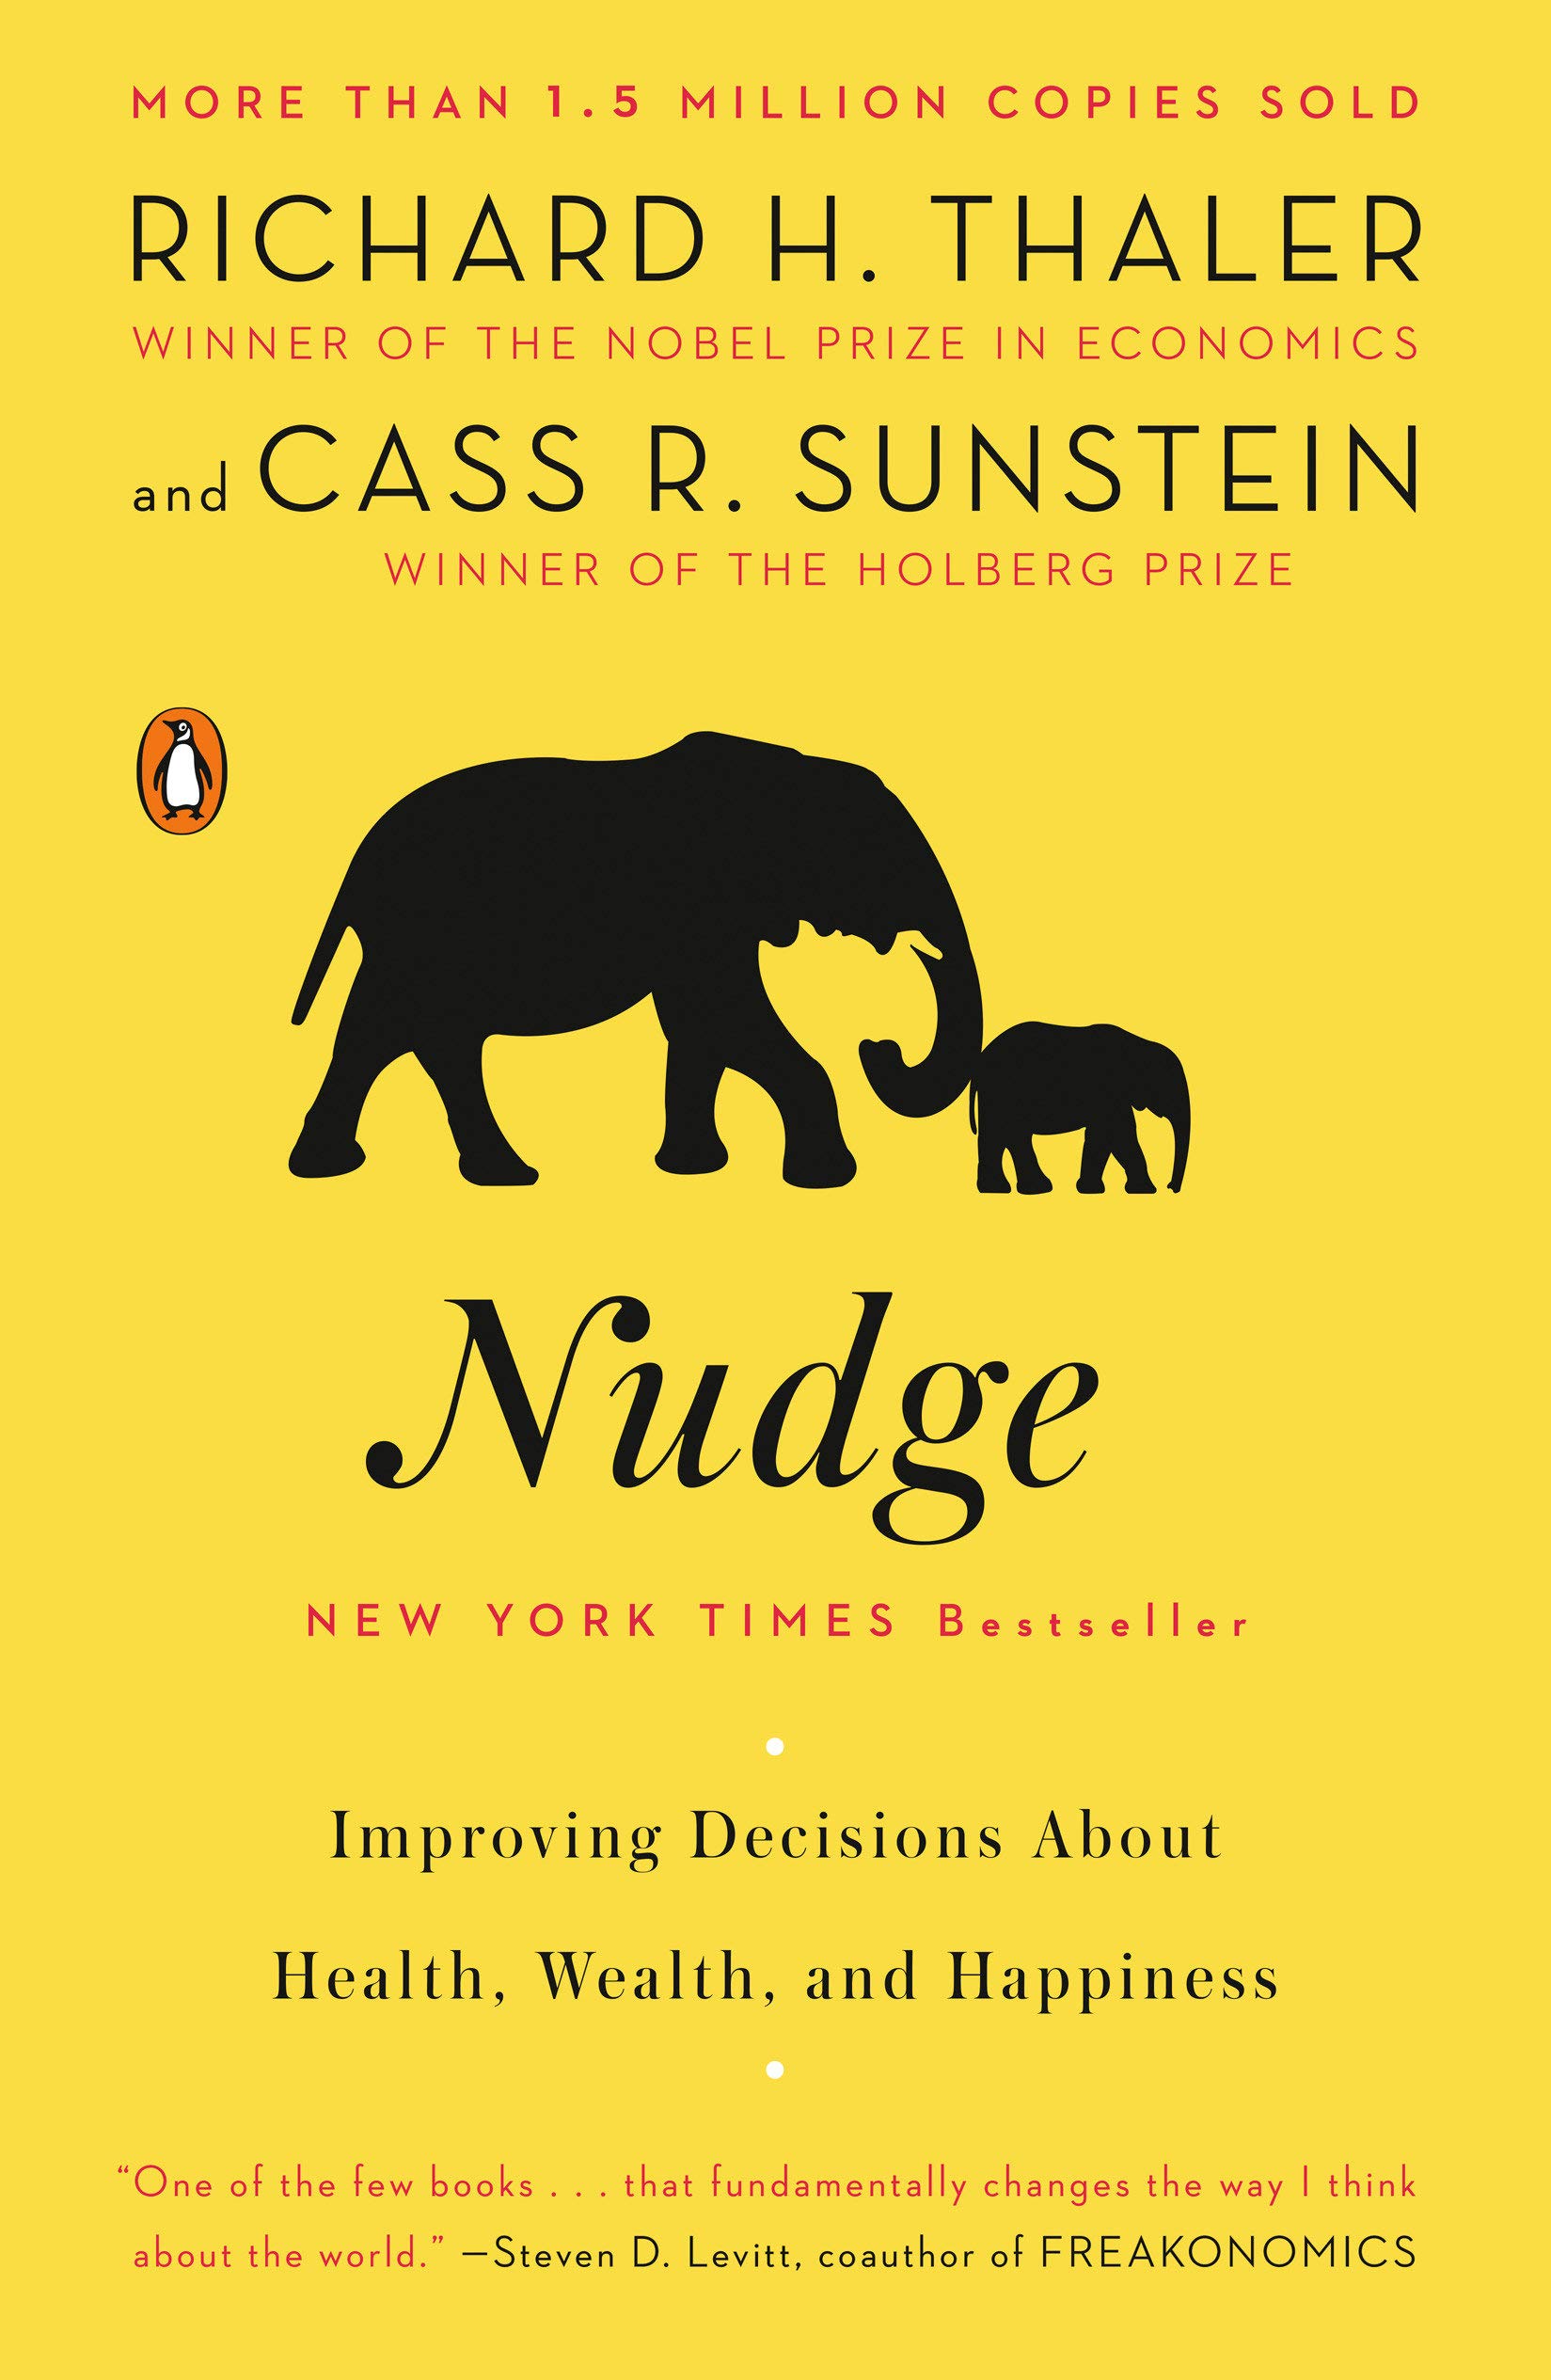 The book cover for Nudge.